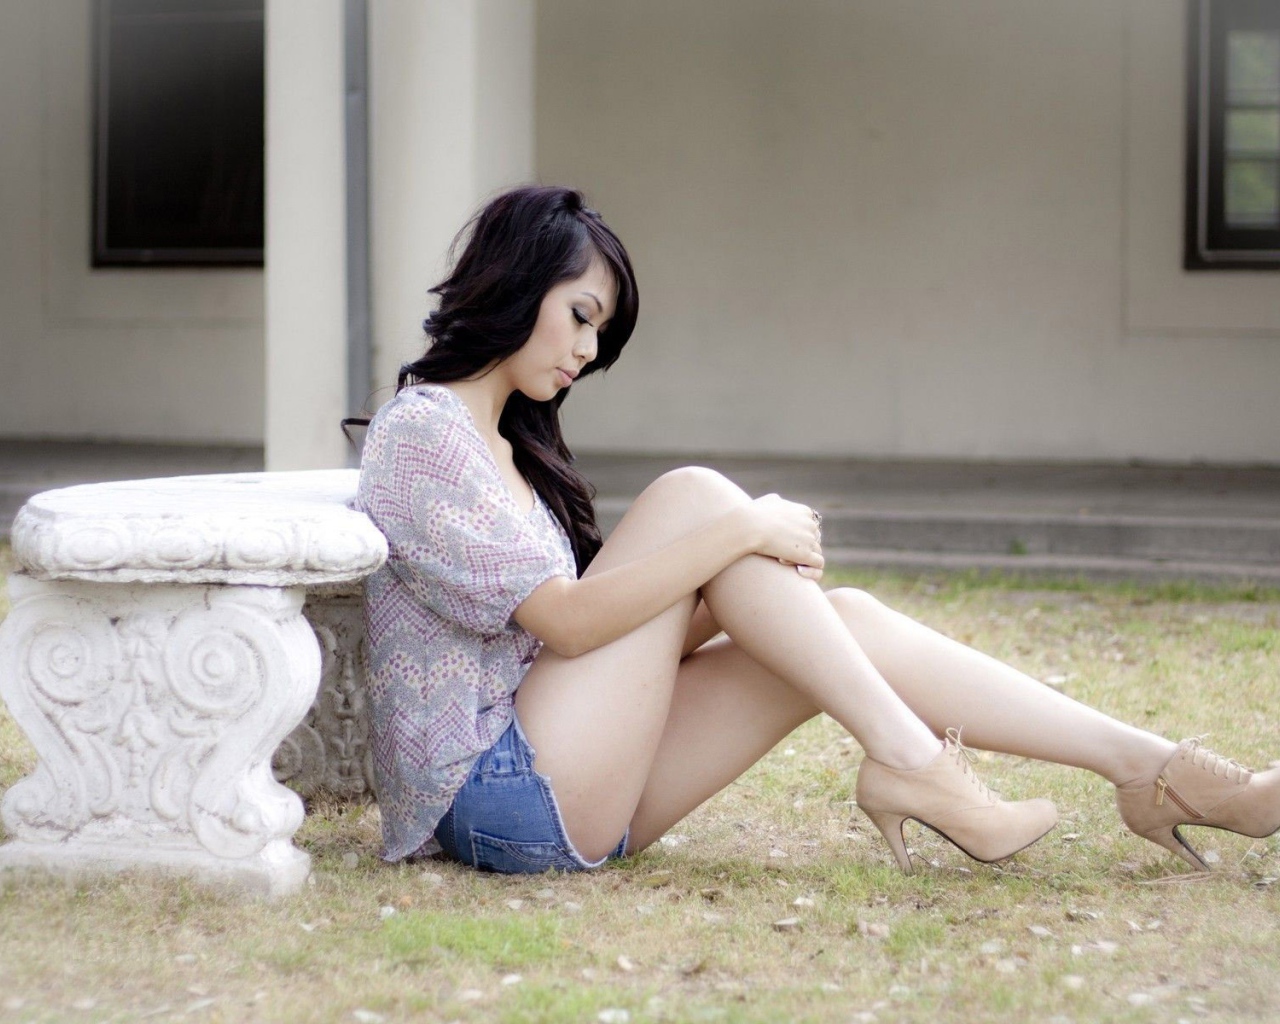 Brunette sitting on the ground near a stone bench